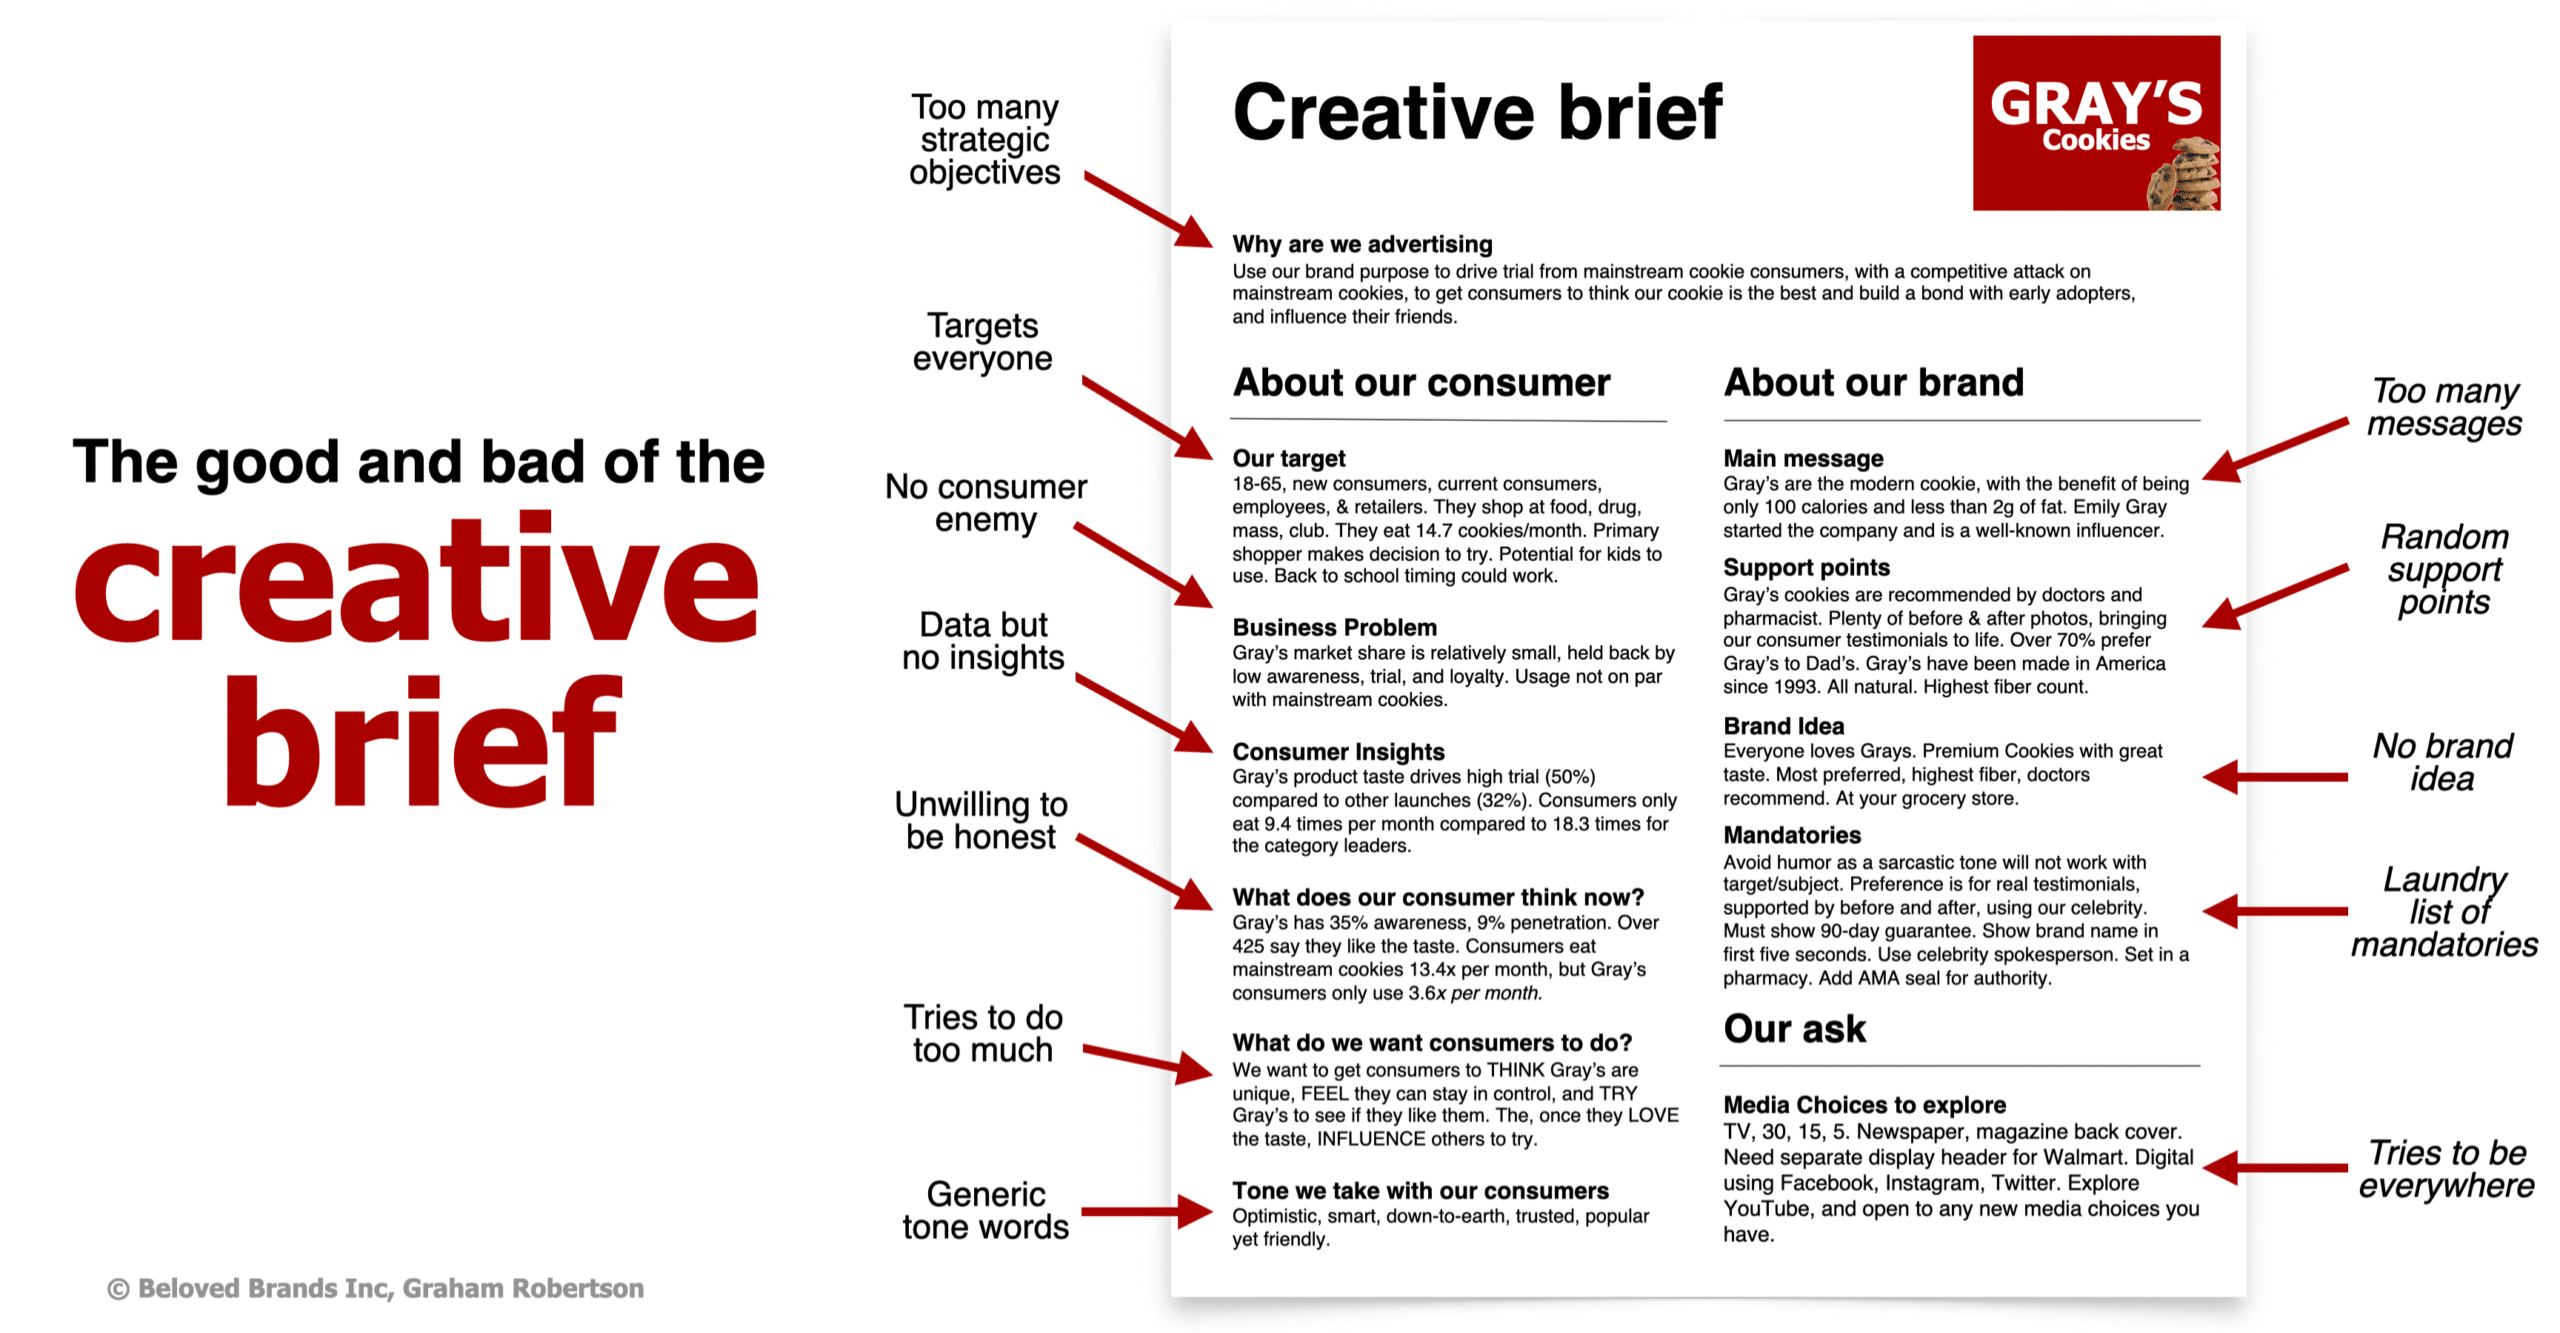 The good and bad of the creative brief